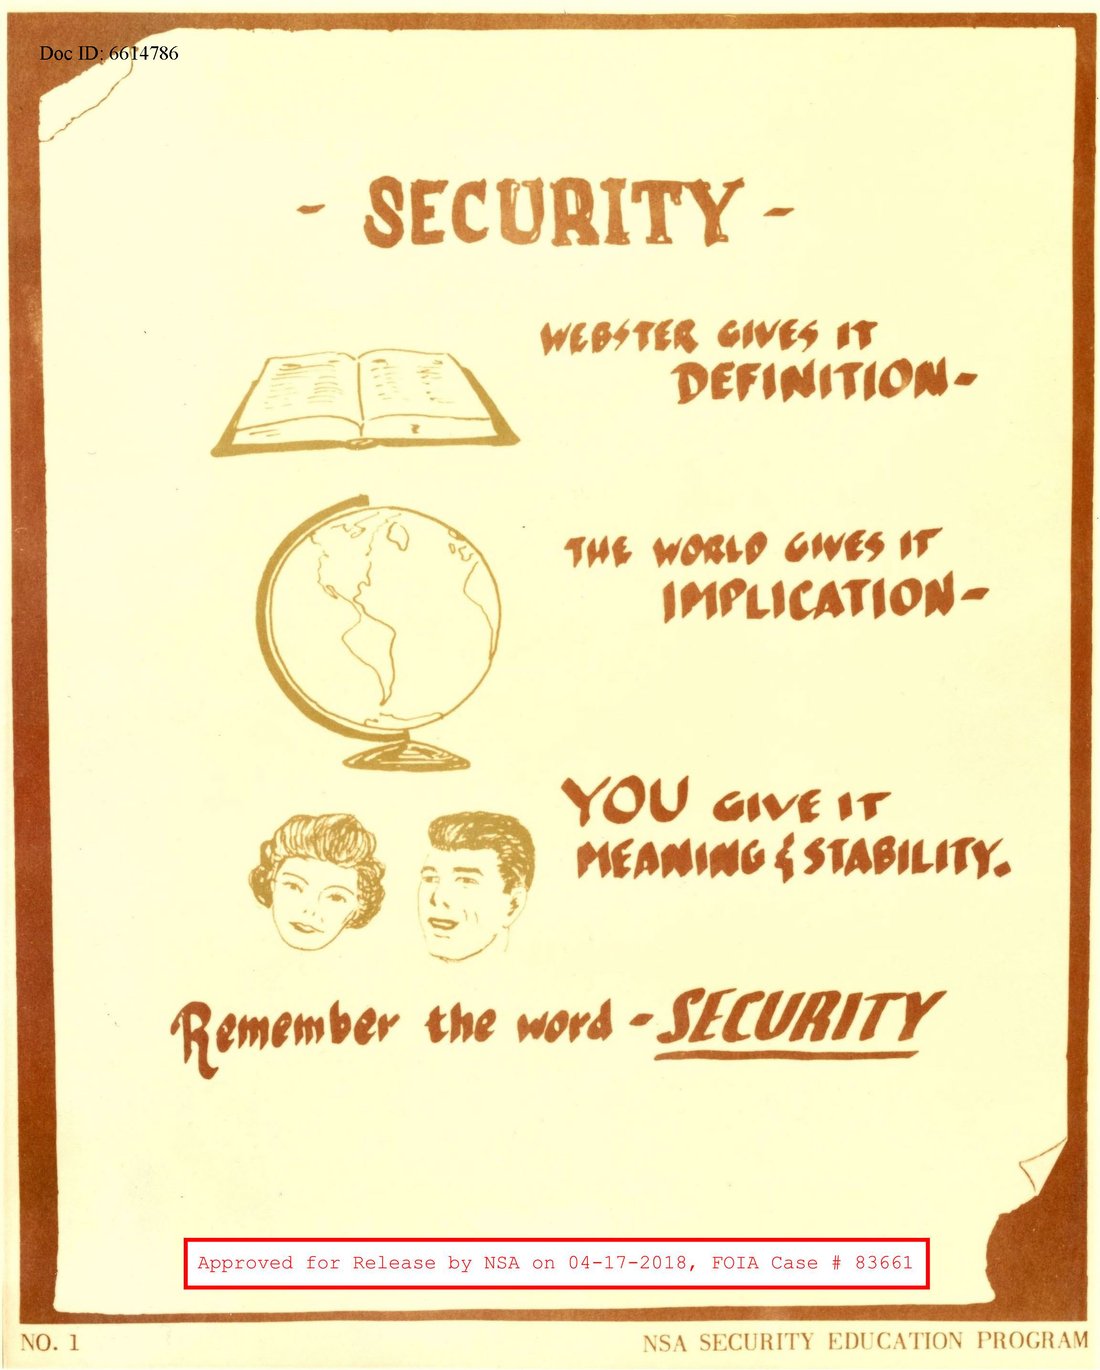 10 Security Awareness Posters Youve Never Seen Before 3968